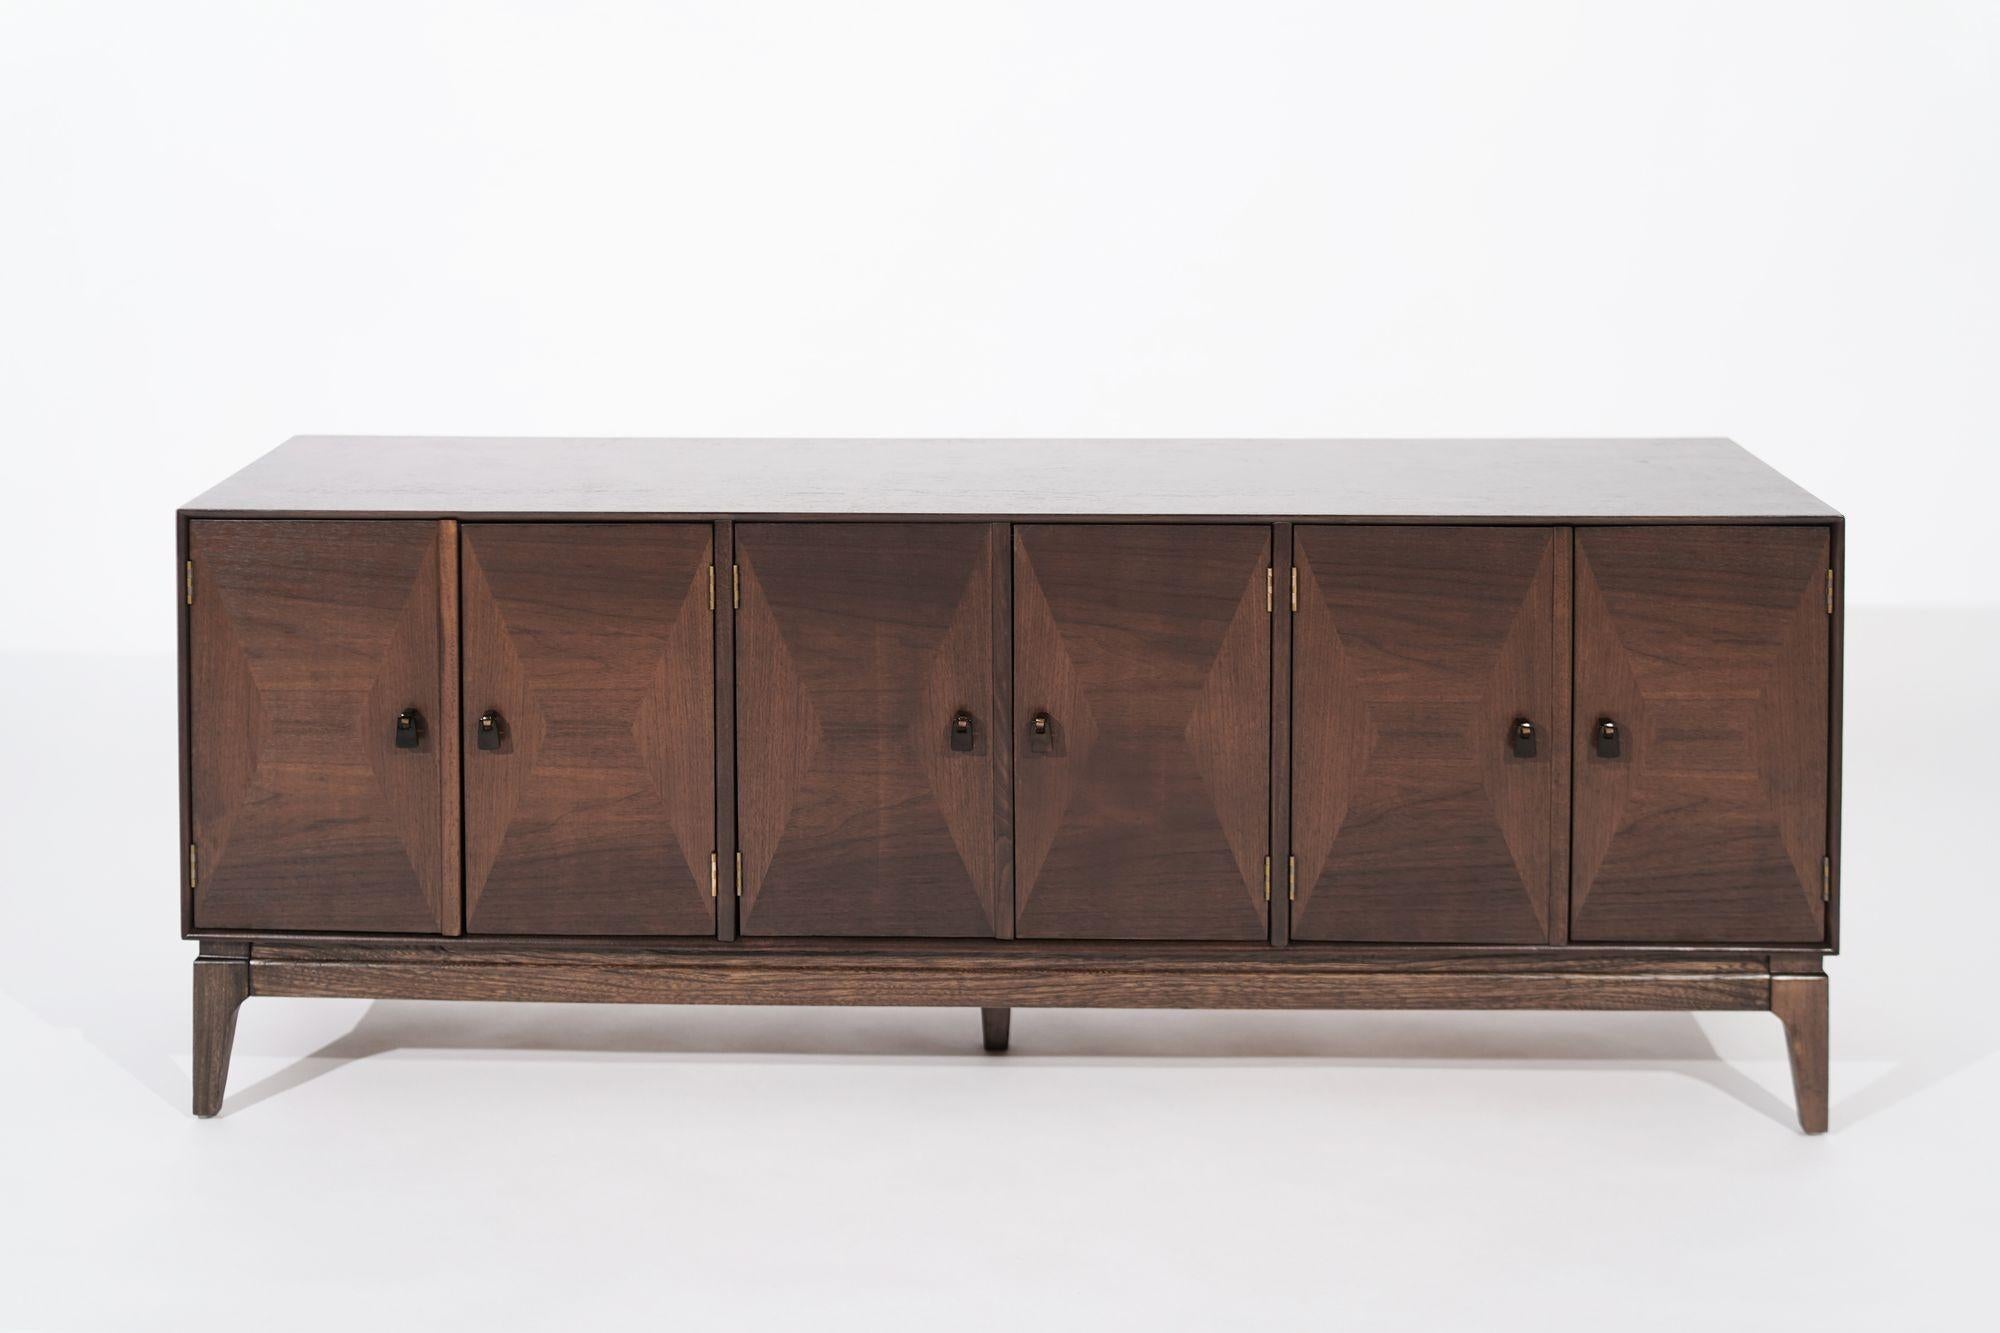 A completely restored low-profile credenza or media unit, circa 1950-1959. The doors open up to reveal shelving. The door-knocker-style hardware has been refinished in ORB.